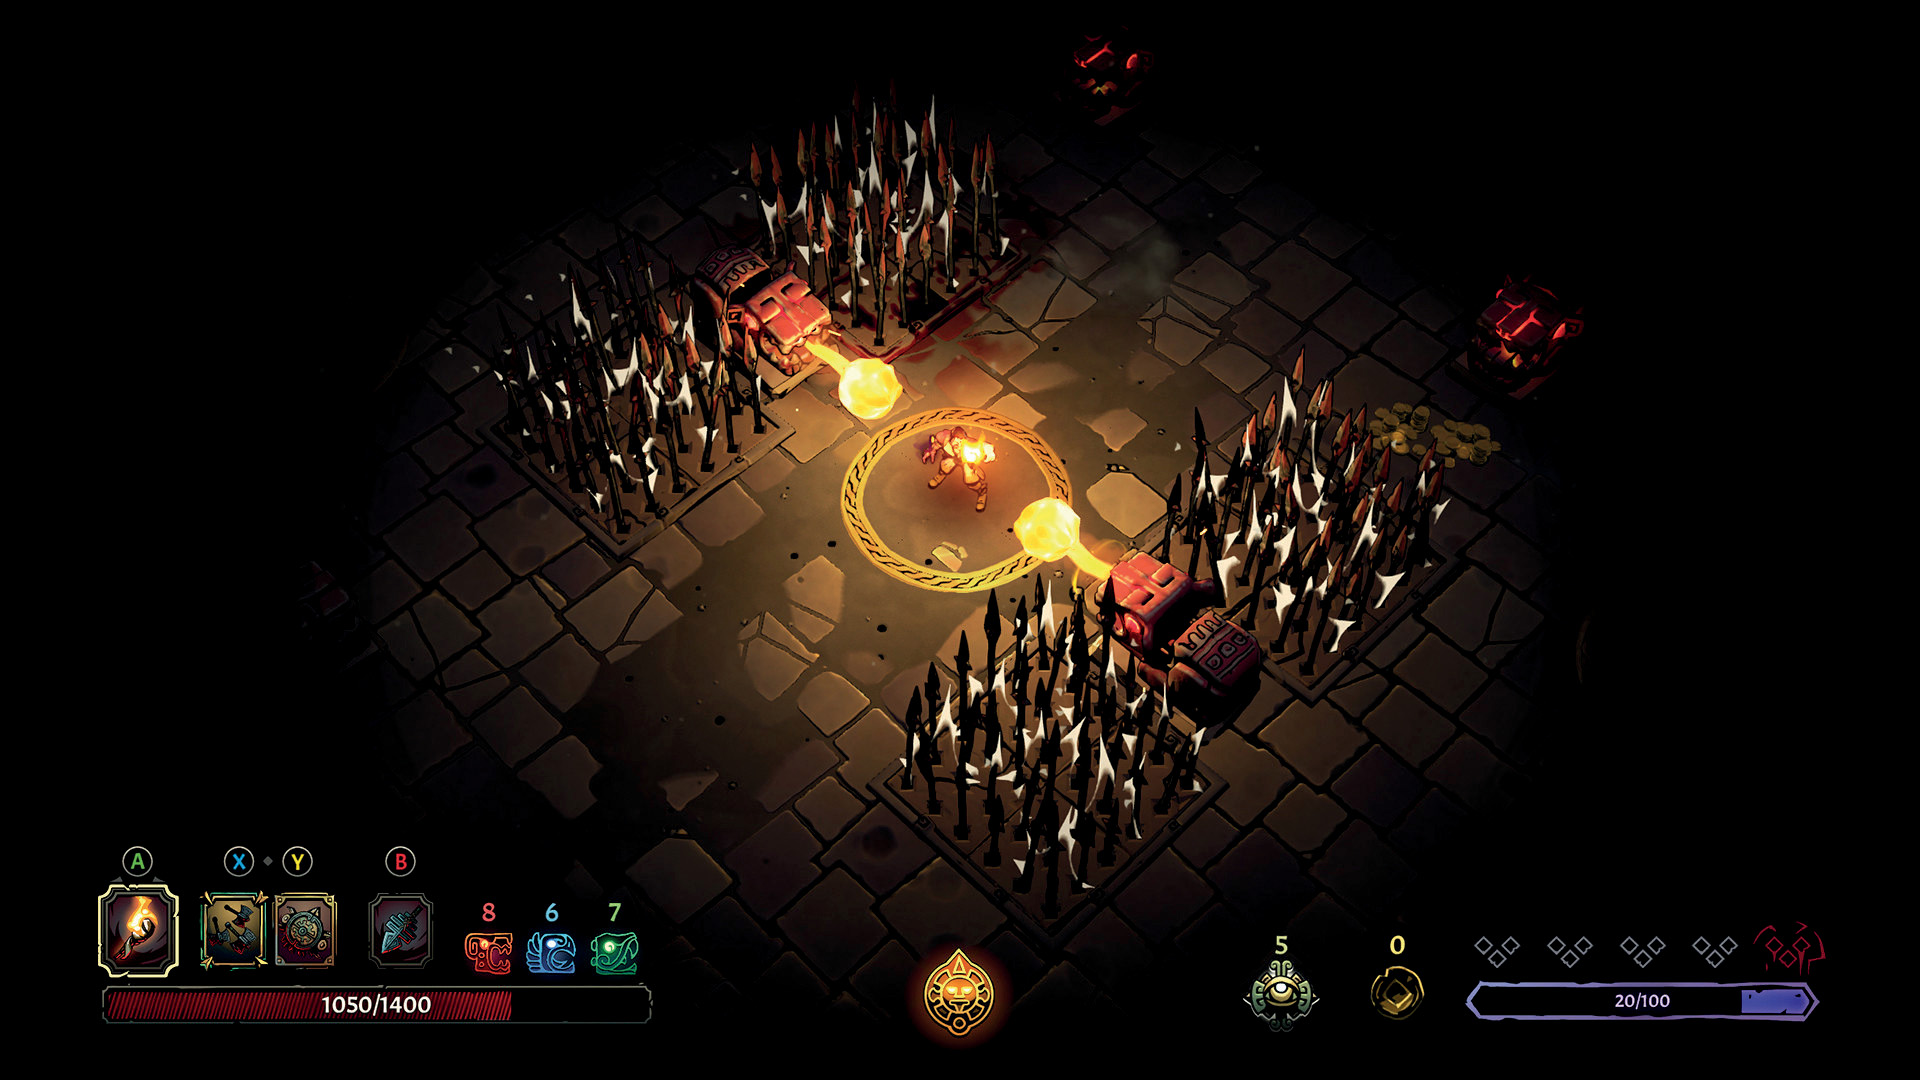 download the last version for mac Curse of the Dead Gods